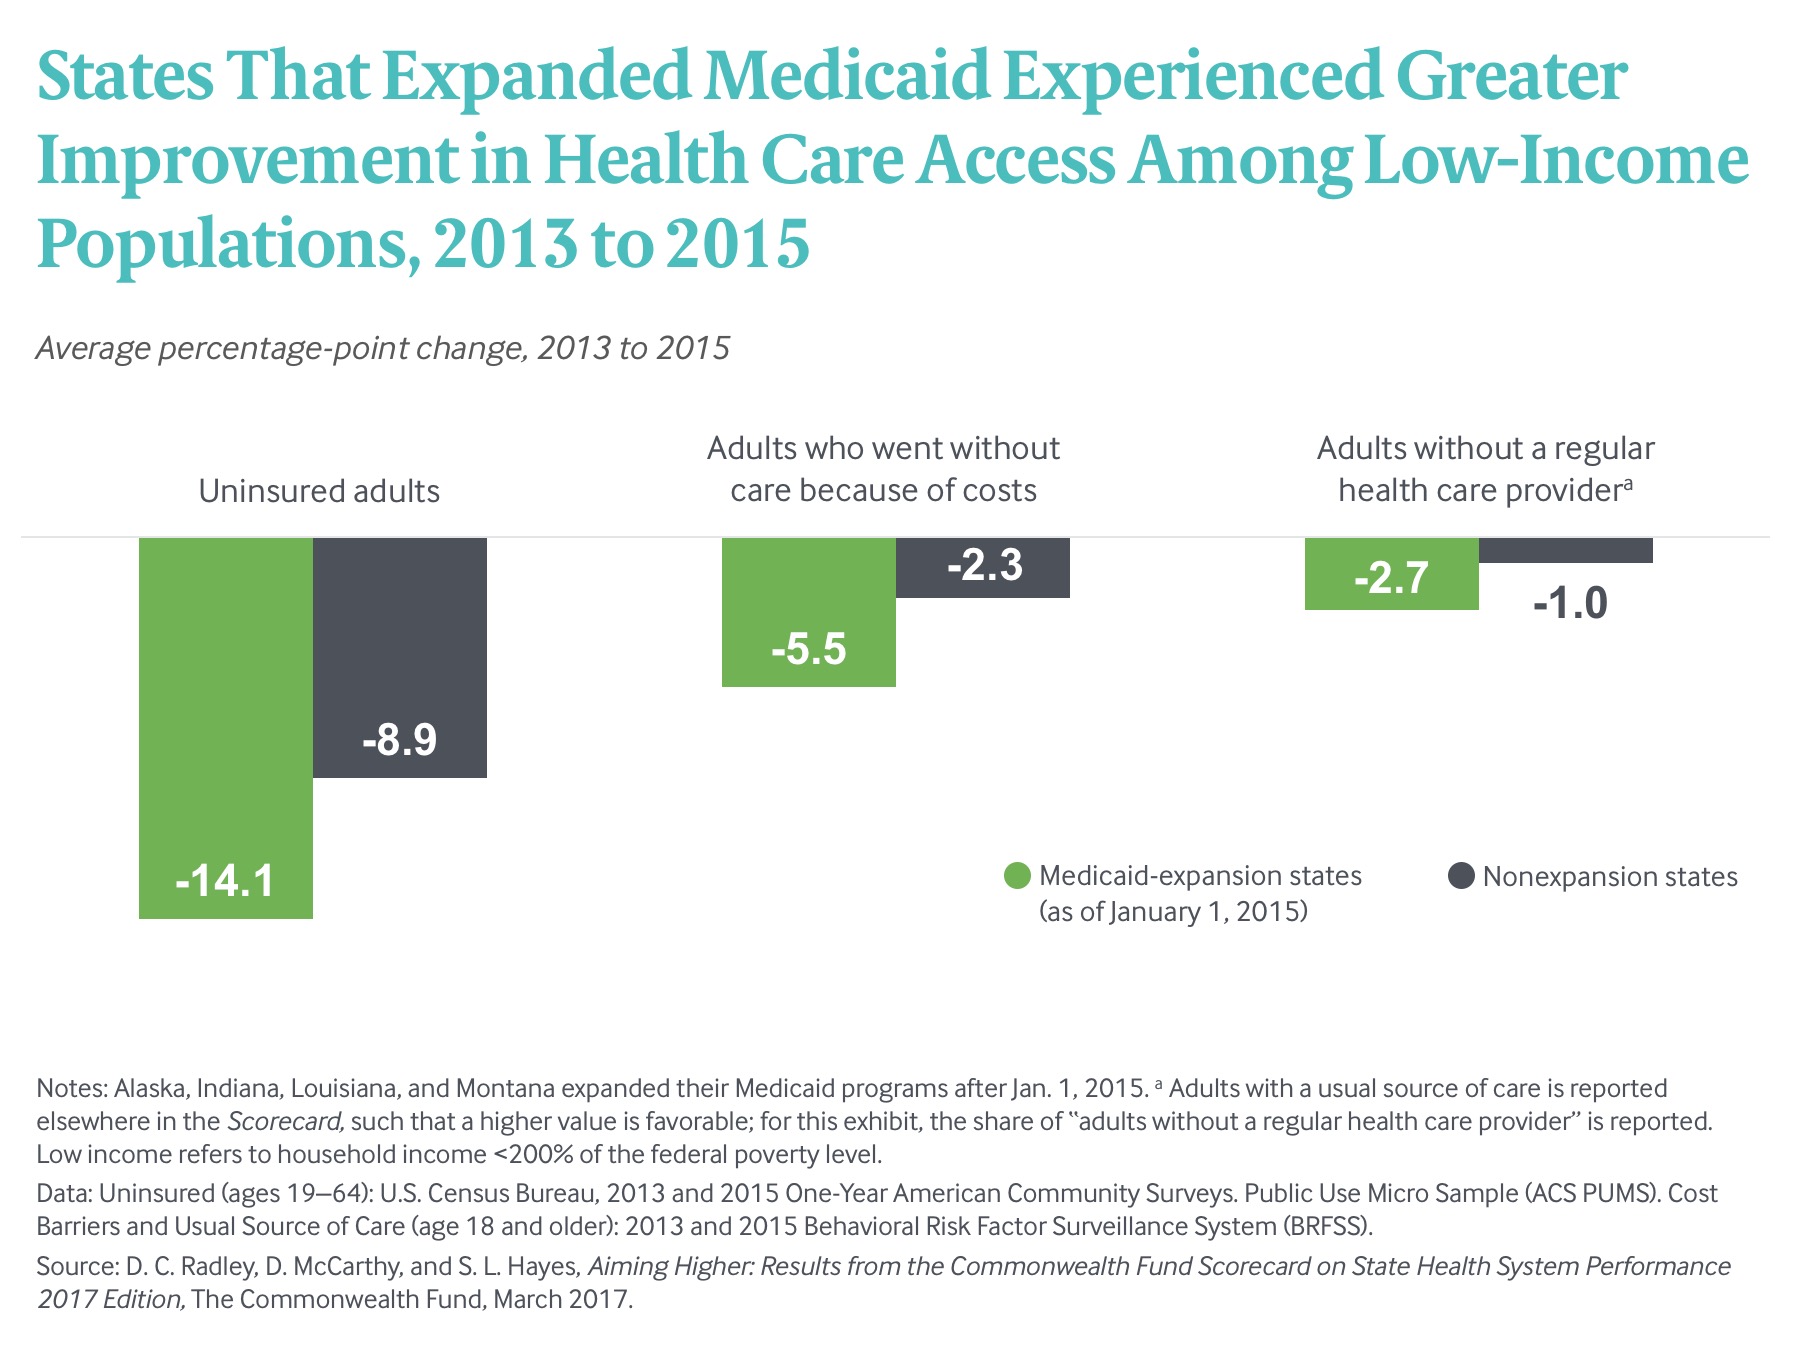 Graph showing improvement in healthcare access in states that expanded Medicaid